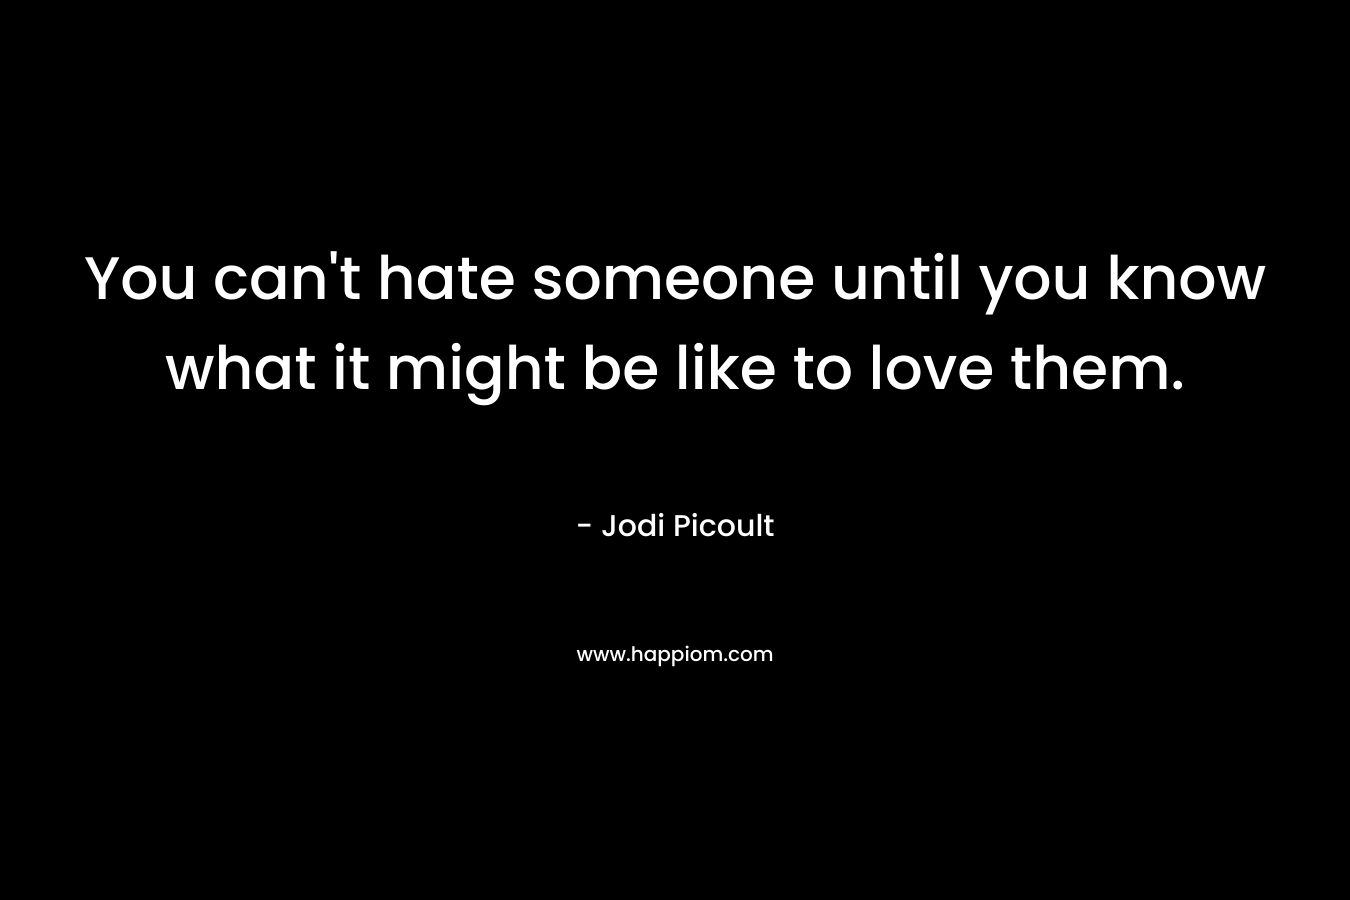 You can't hate someone until you know what it might be like to love them.